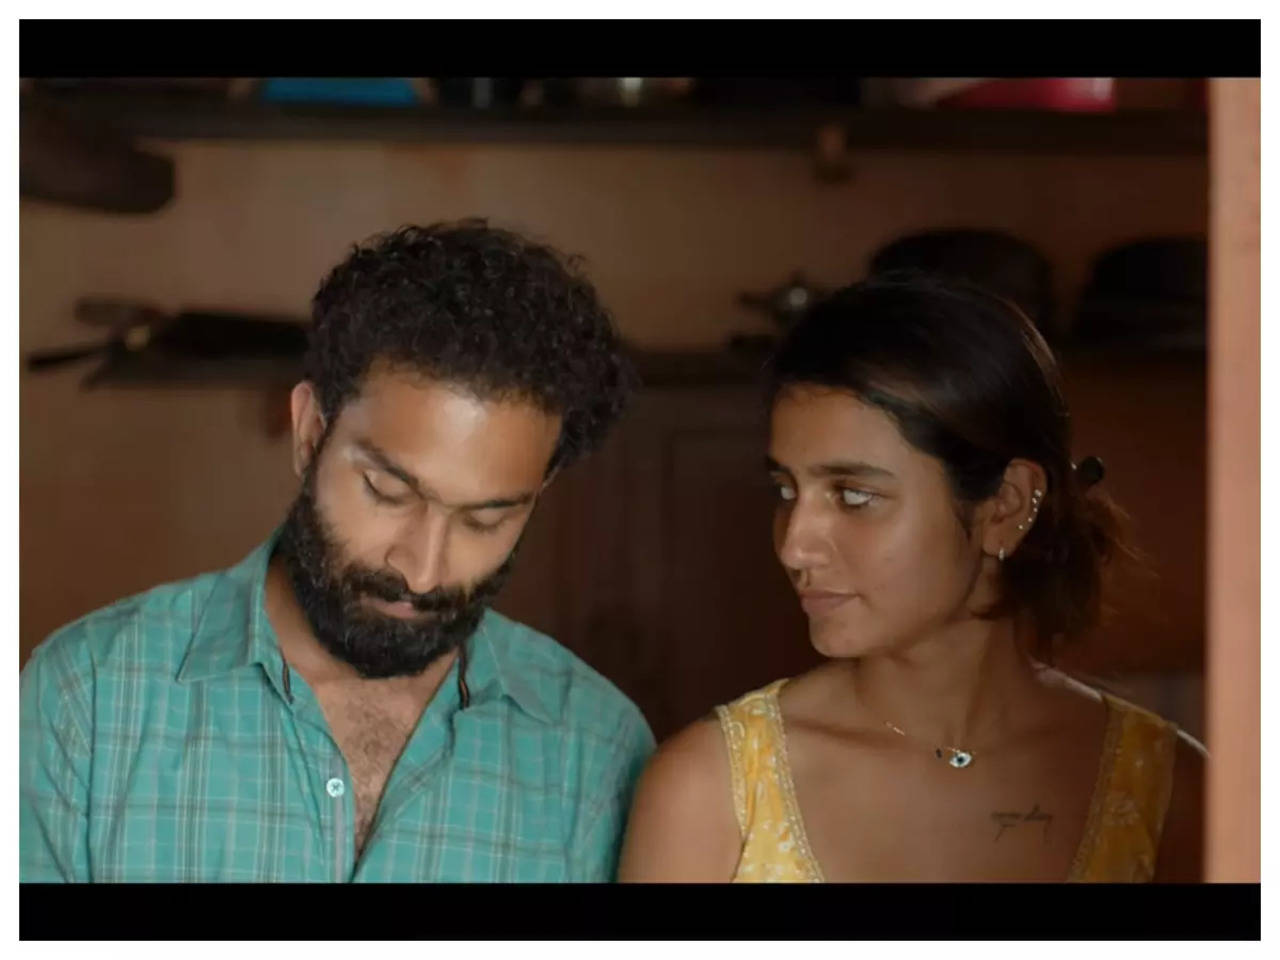 4 Years' trailer: Priya Prakash Varrier and Sarjano Khalid are here to win  our hearts | Malayalam Movie News - Times of India